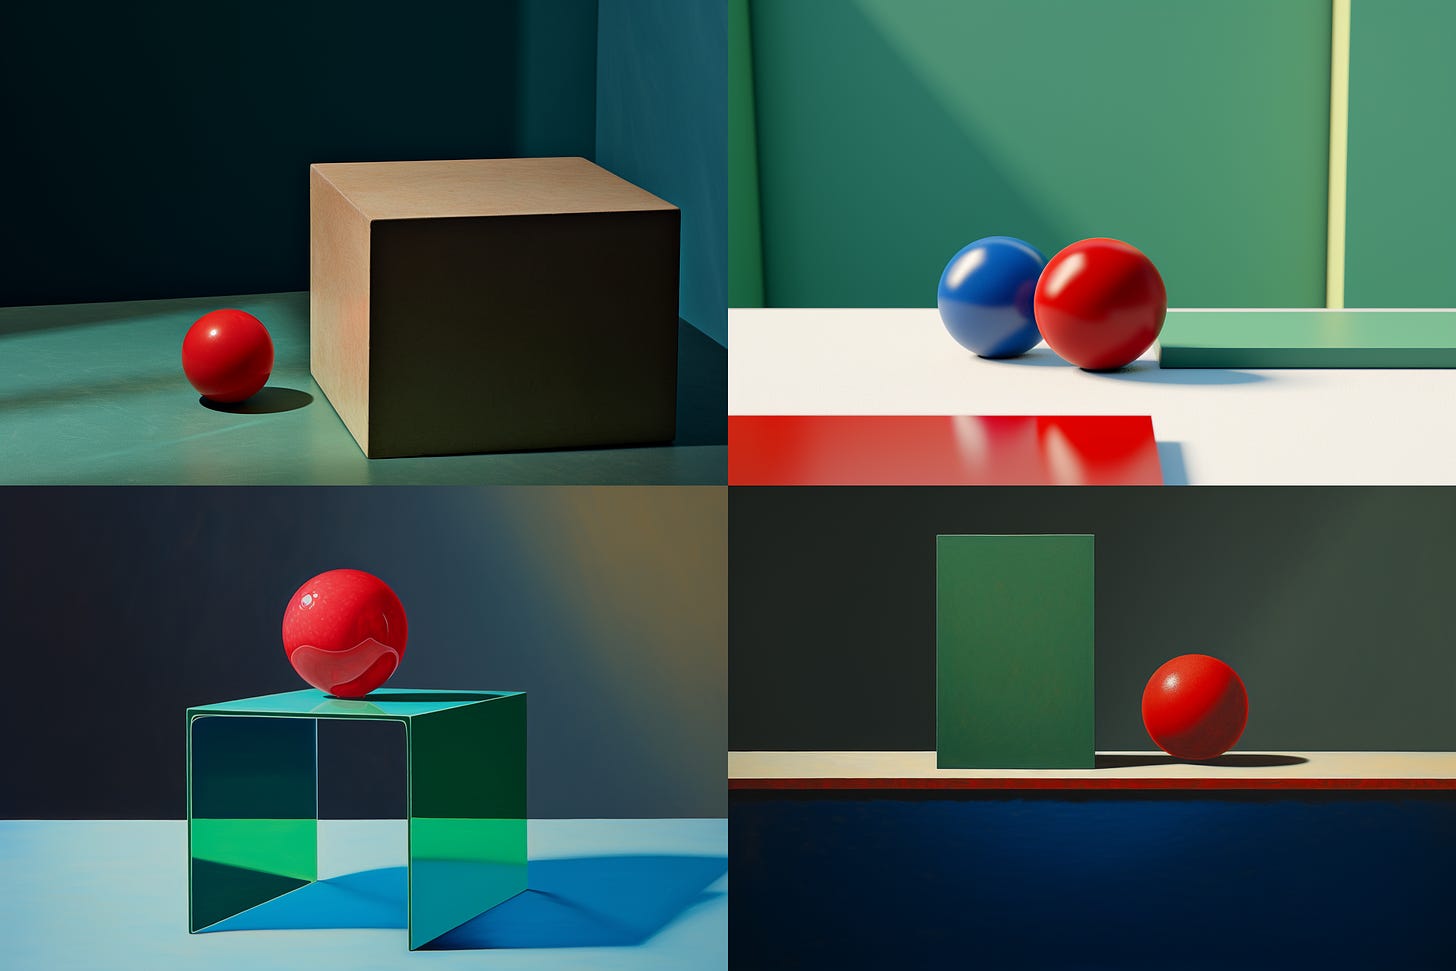 Midjourney V5.2 results for "two red balls and one blue cube on a green table"